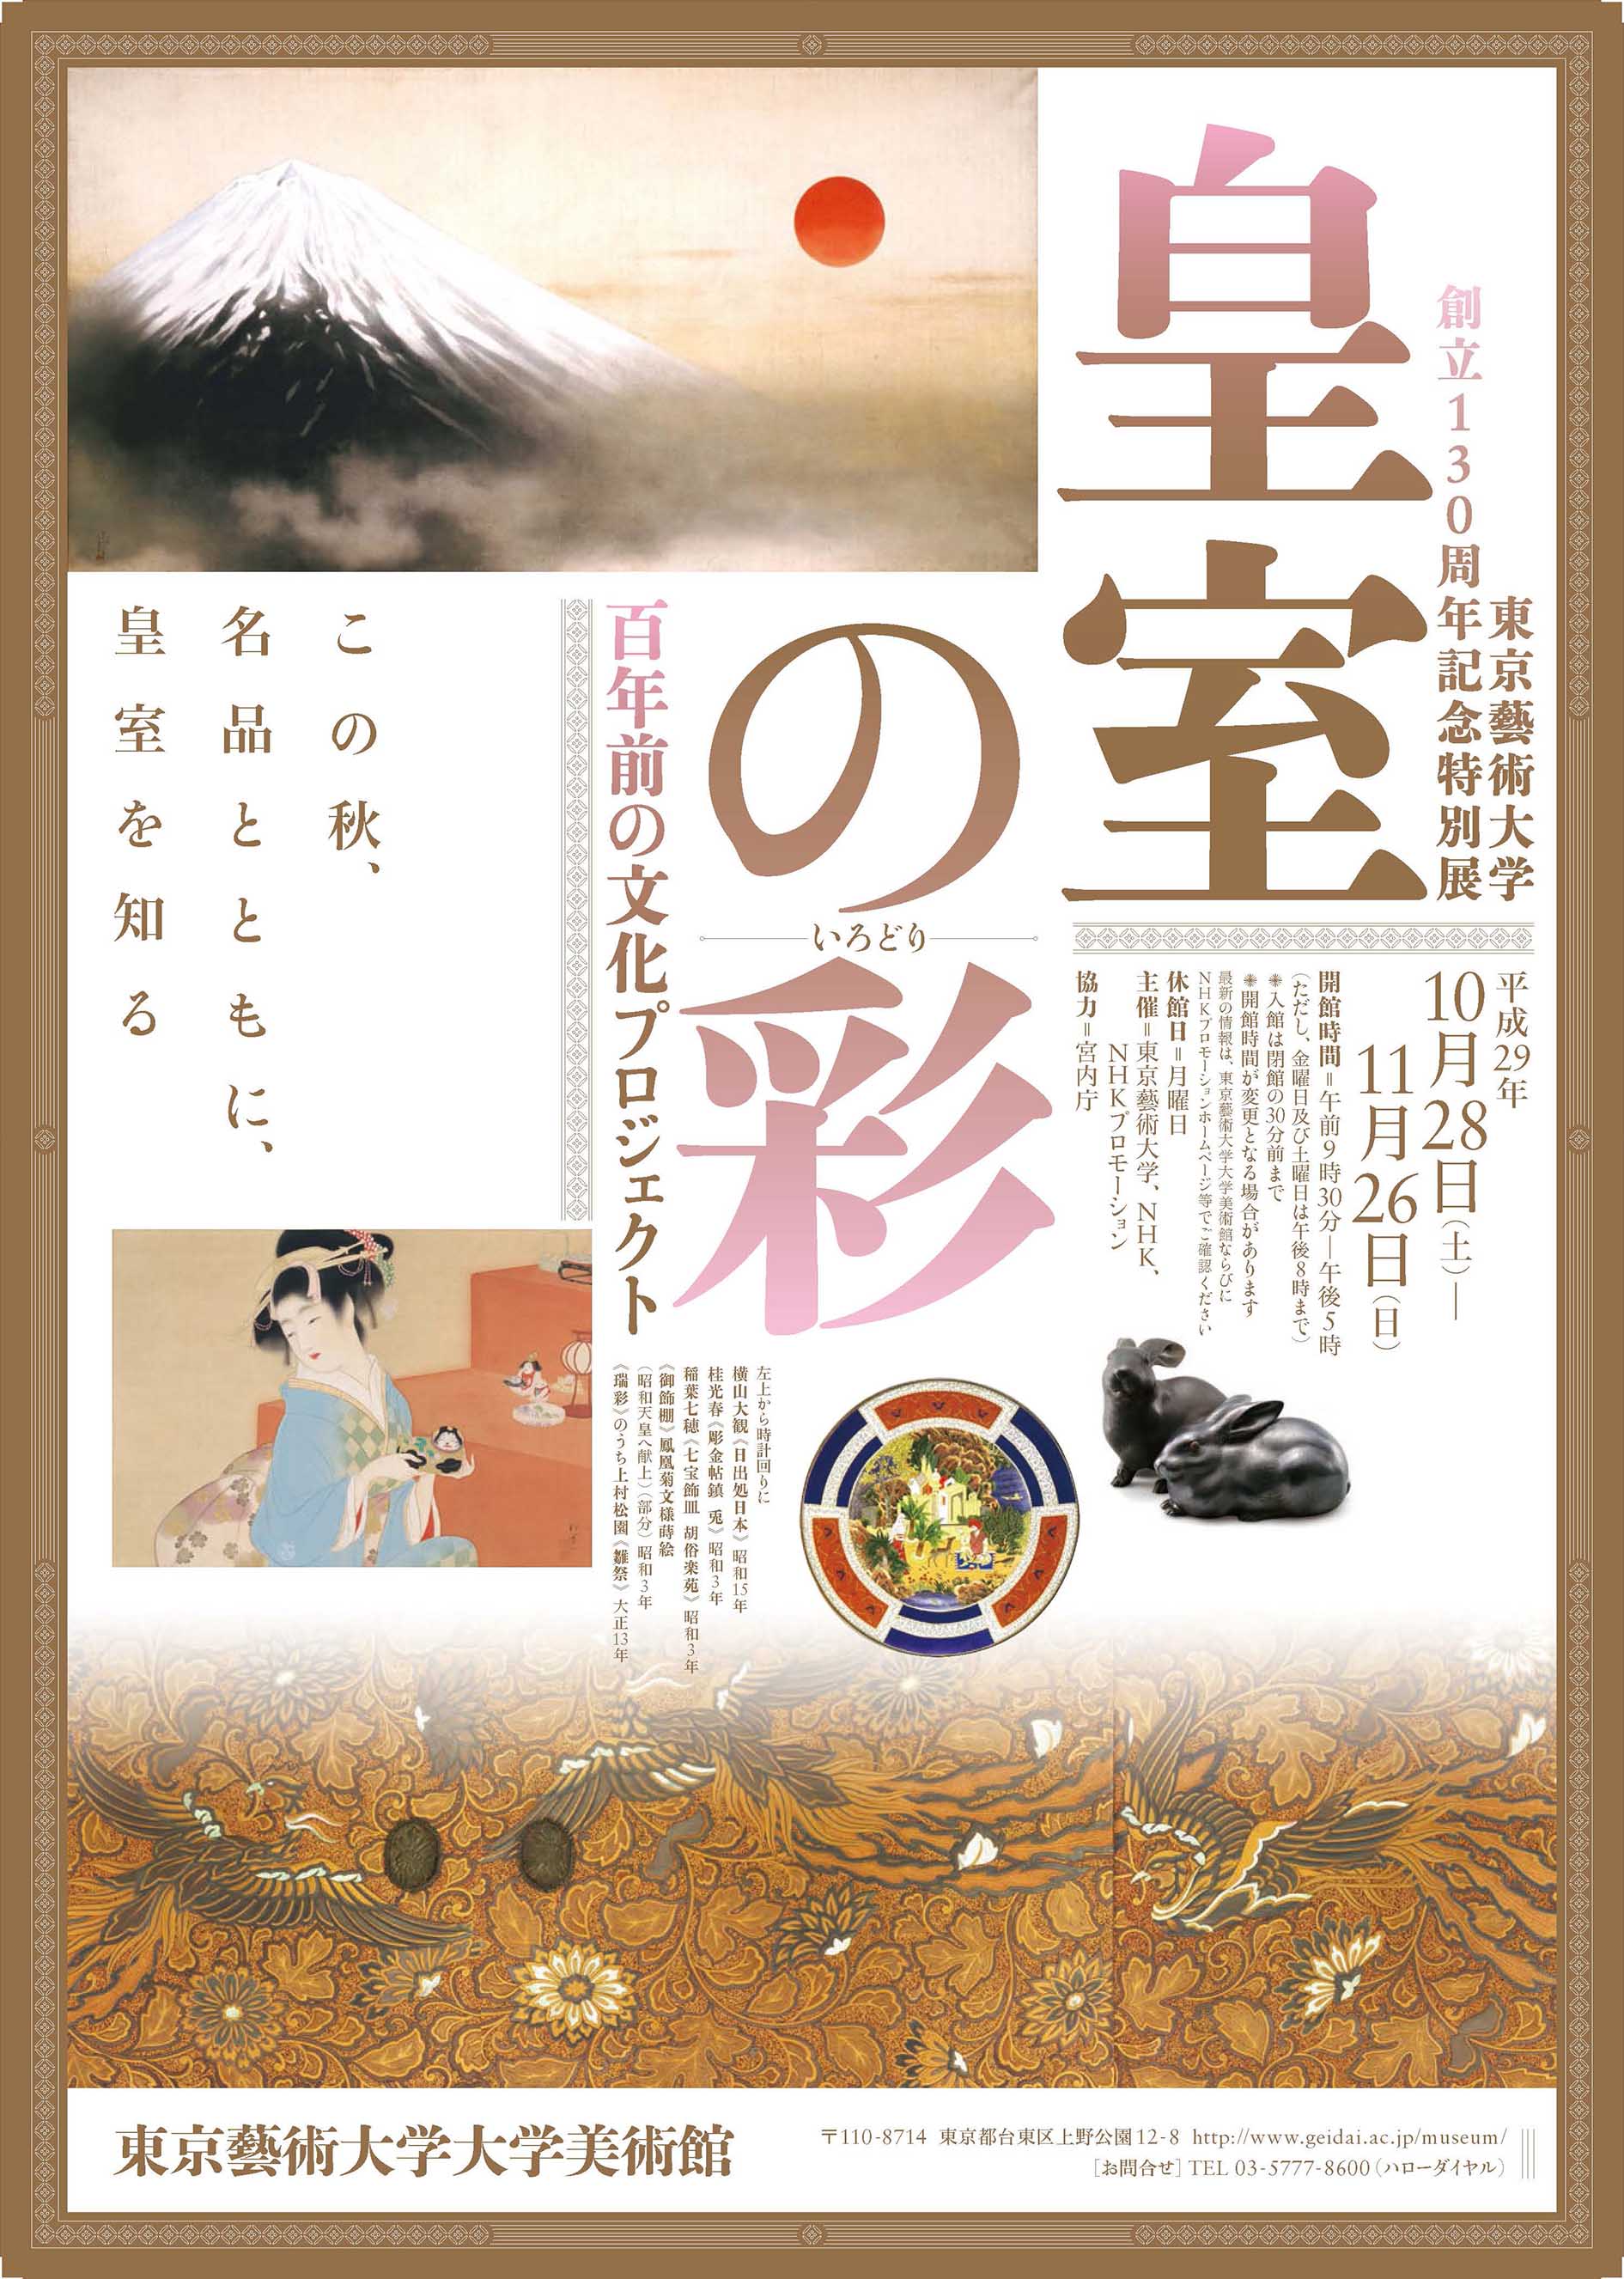 Special Exhibition commemorating the 130th Anniversary of the Tokyo University of the Arts Art Treasures of the Imperial Court Produced by the Tokyo Fine Arts School During the Early 20th Century